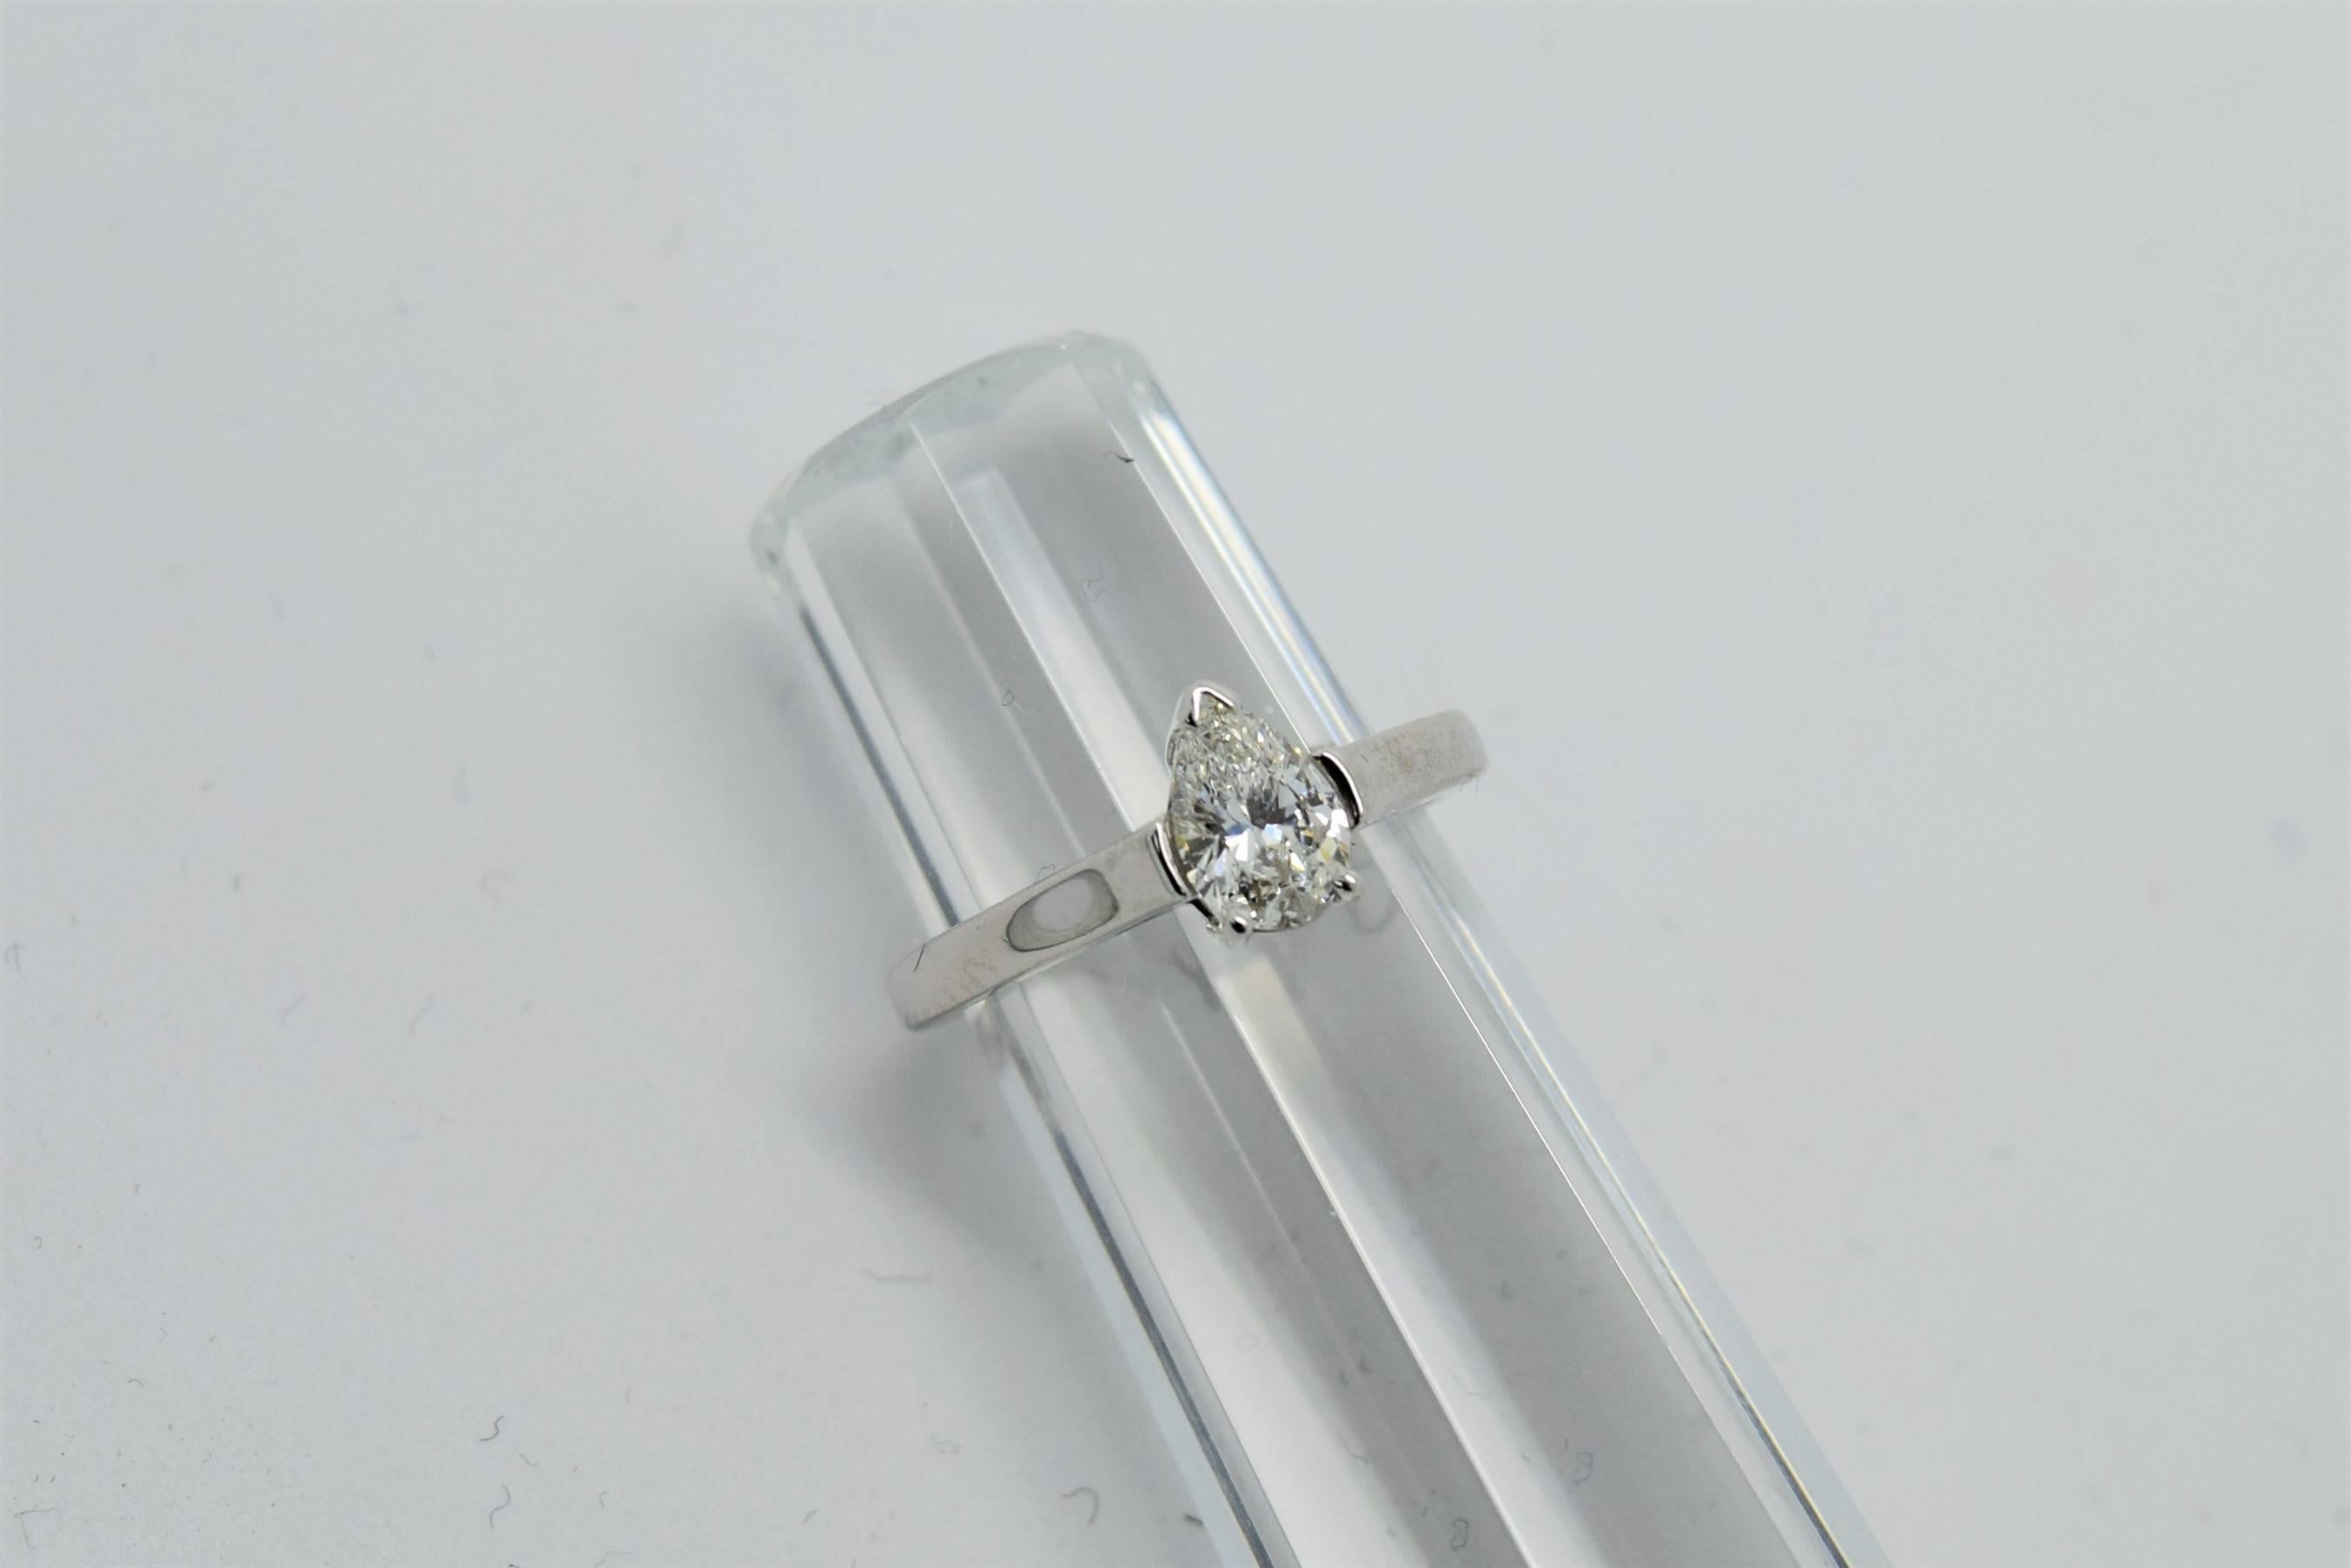 Unique Tiffany and Co. pear shape diamond engagement ring in platinum.
The pear shape diamond weighs 0.55ct and is approximately F in color and VS1 in clarity.
Ring size 4 1/4 (re-sizable)
Hallmarks 